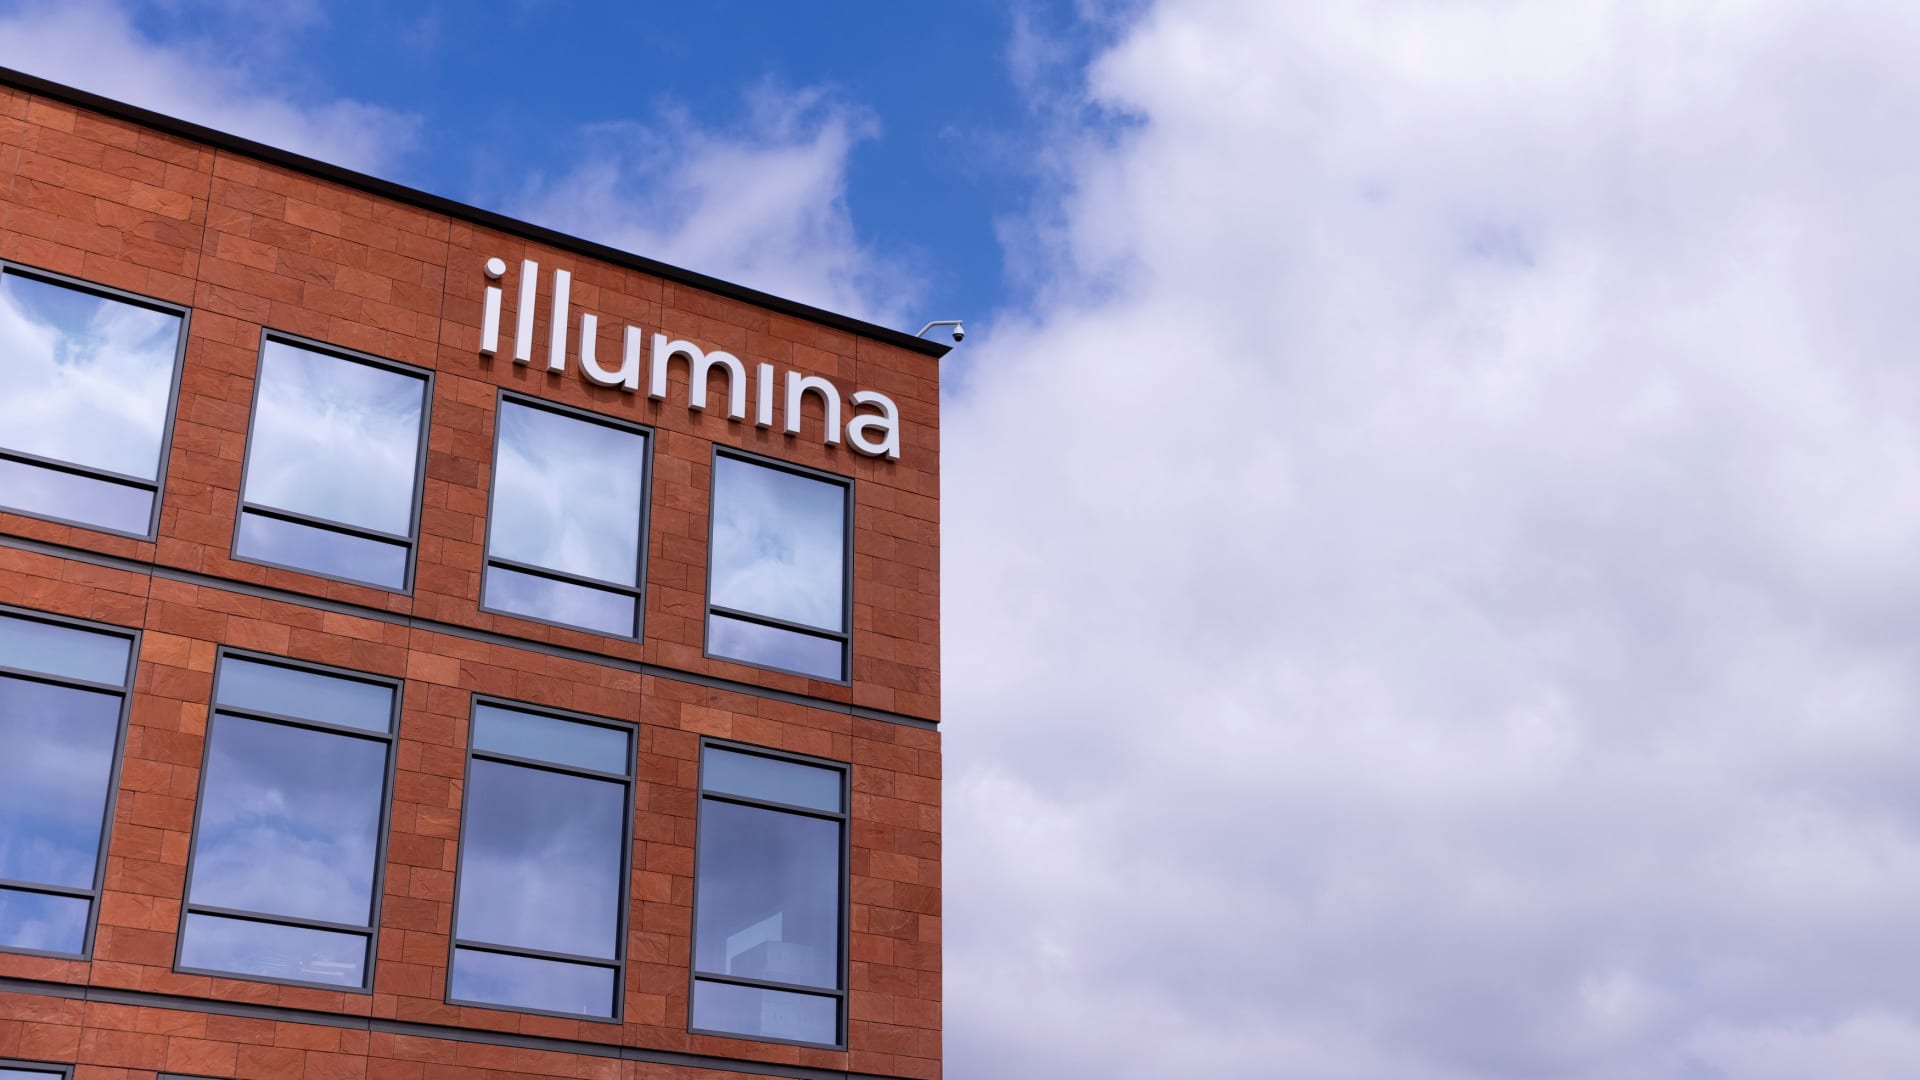 Carl Icahn says new Illumina CEO has his 'full support' months after proxy fight